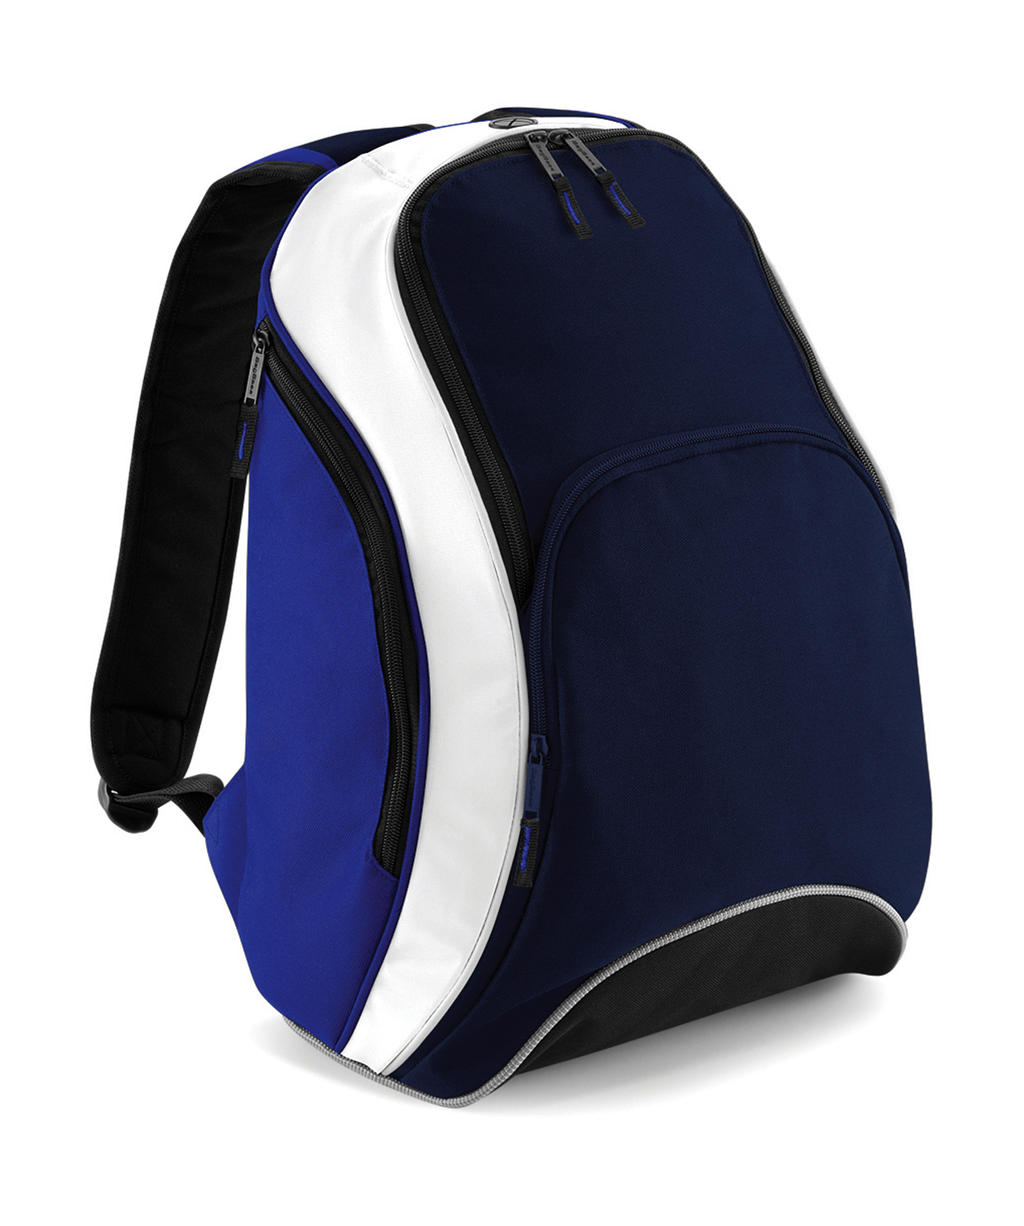  Teamwear Backpack in Farbe French Navy/Bright Royal/White